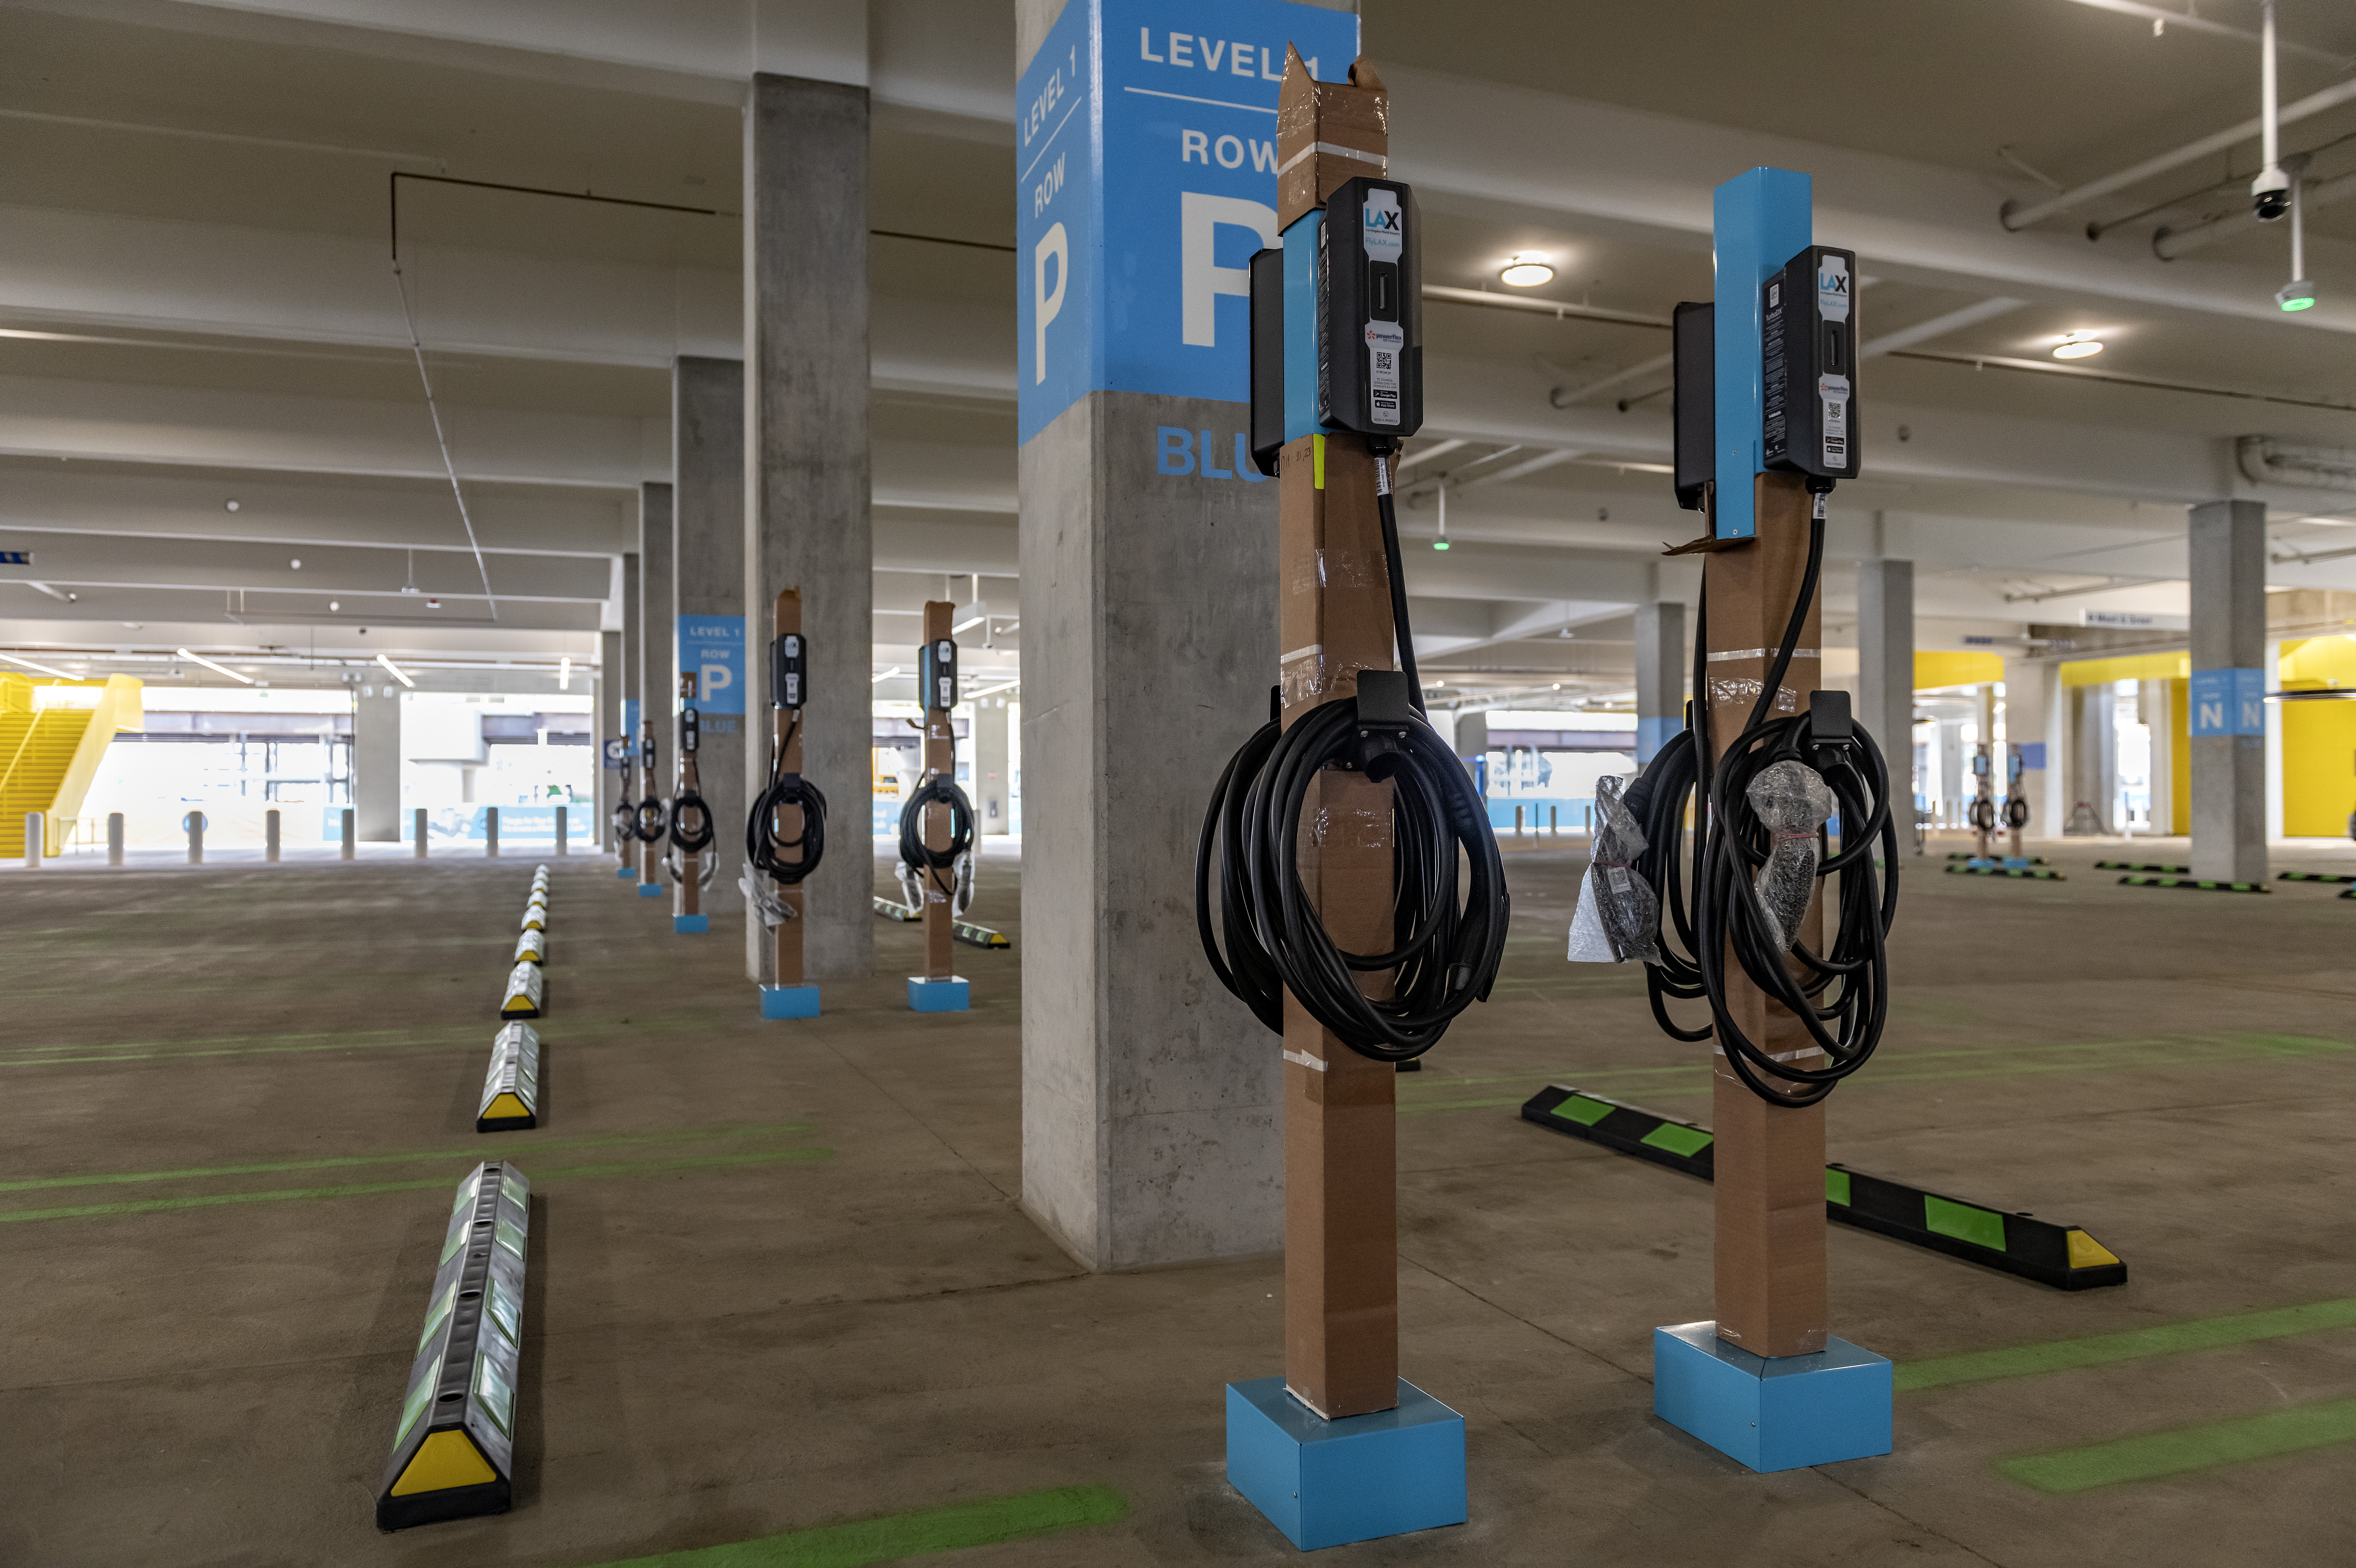 LAX Economy Parking has 500 electric vehicle chargers being phased in over the first year of operations.